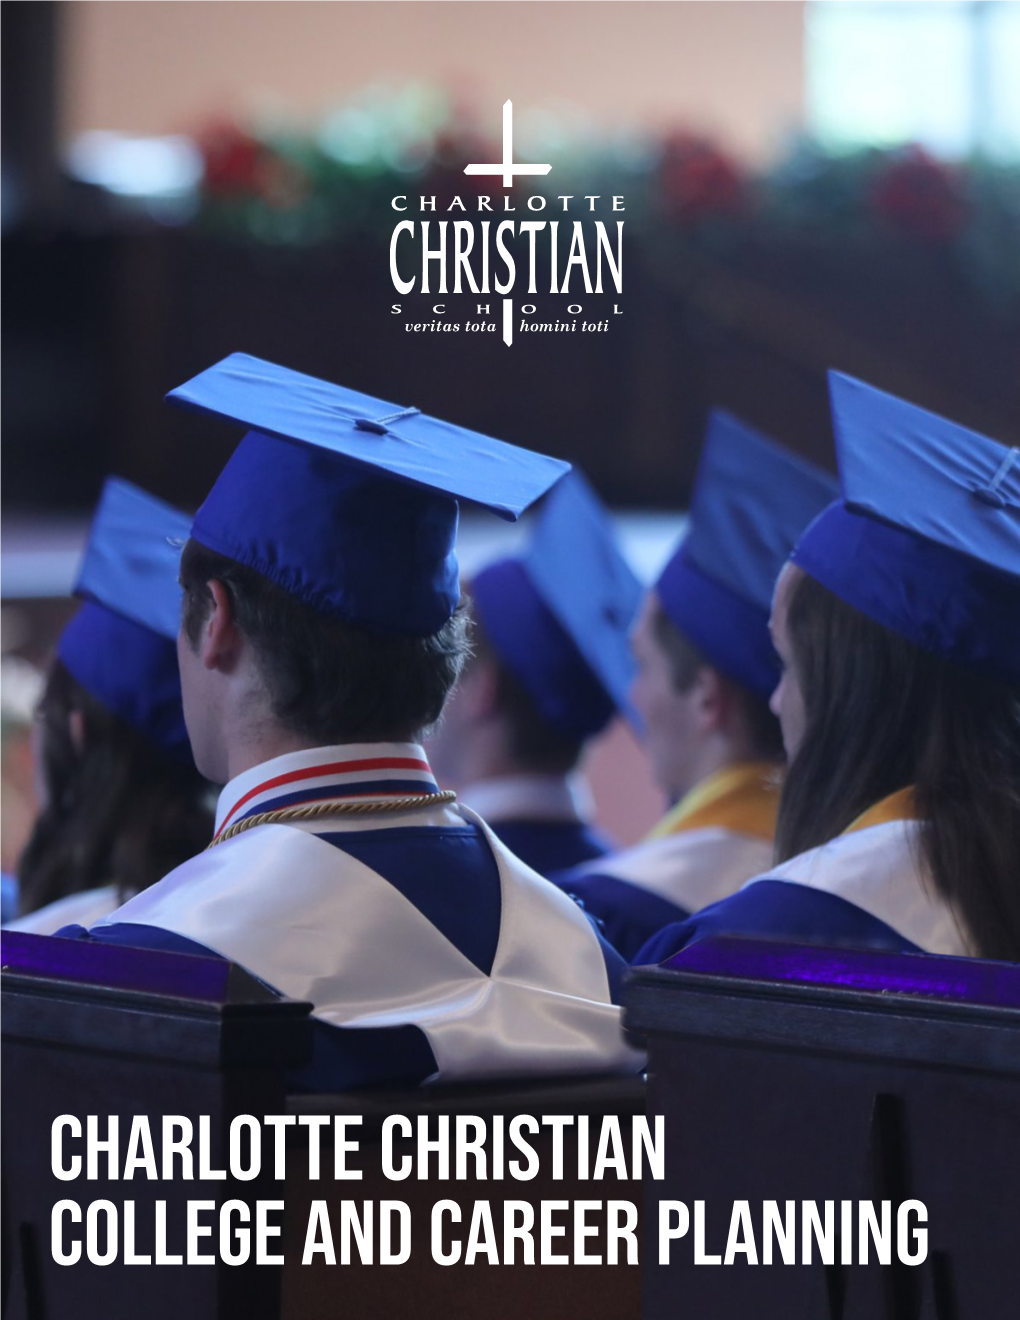 Charlotte Christian College and Career Planning